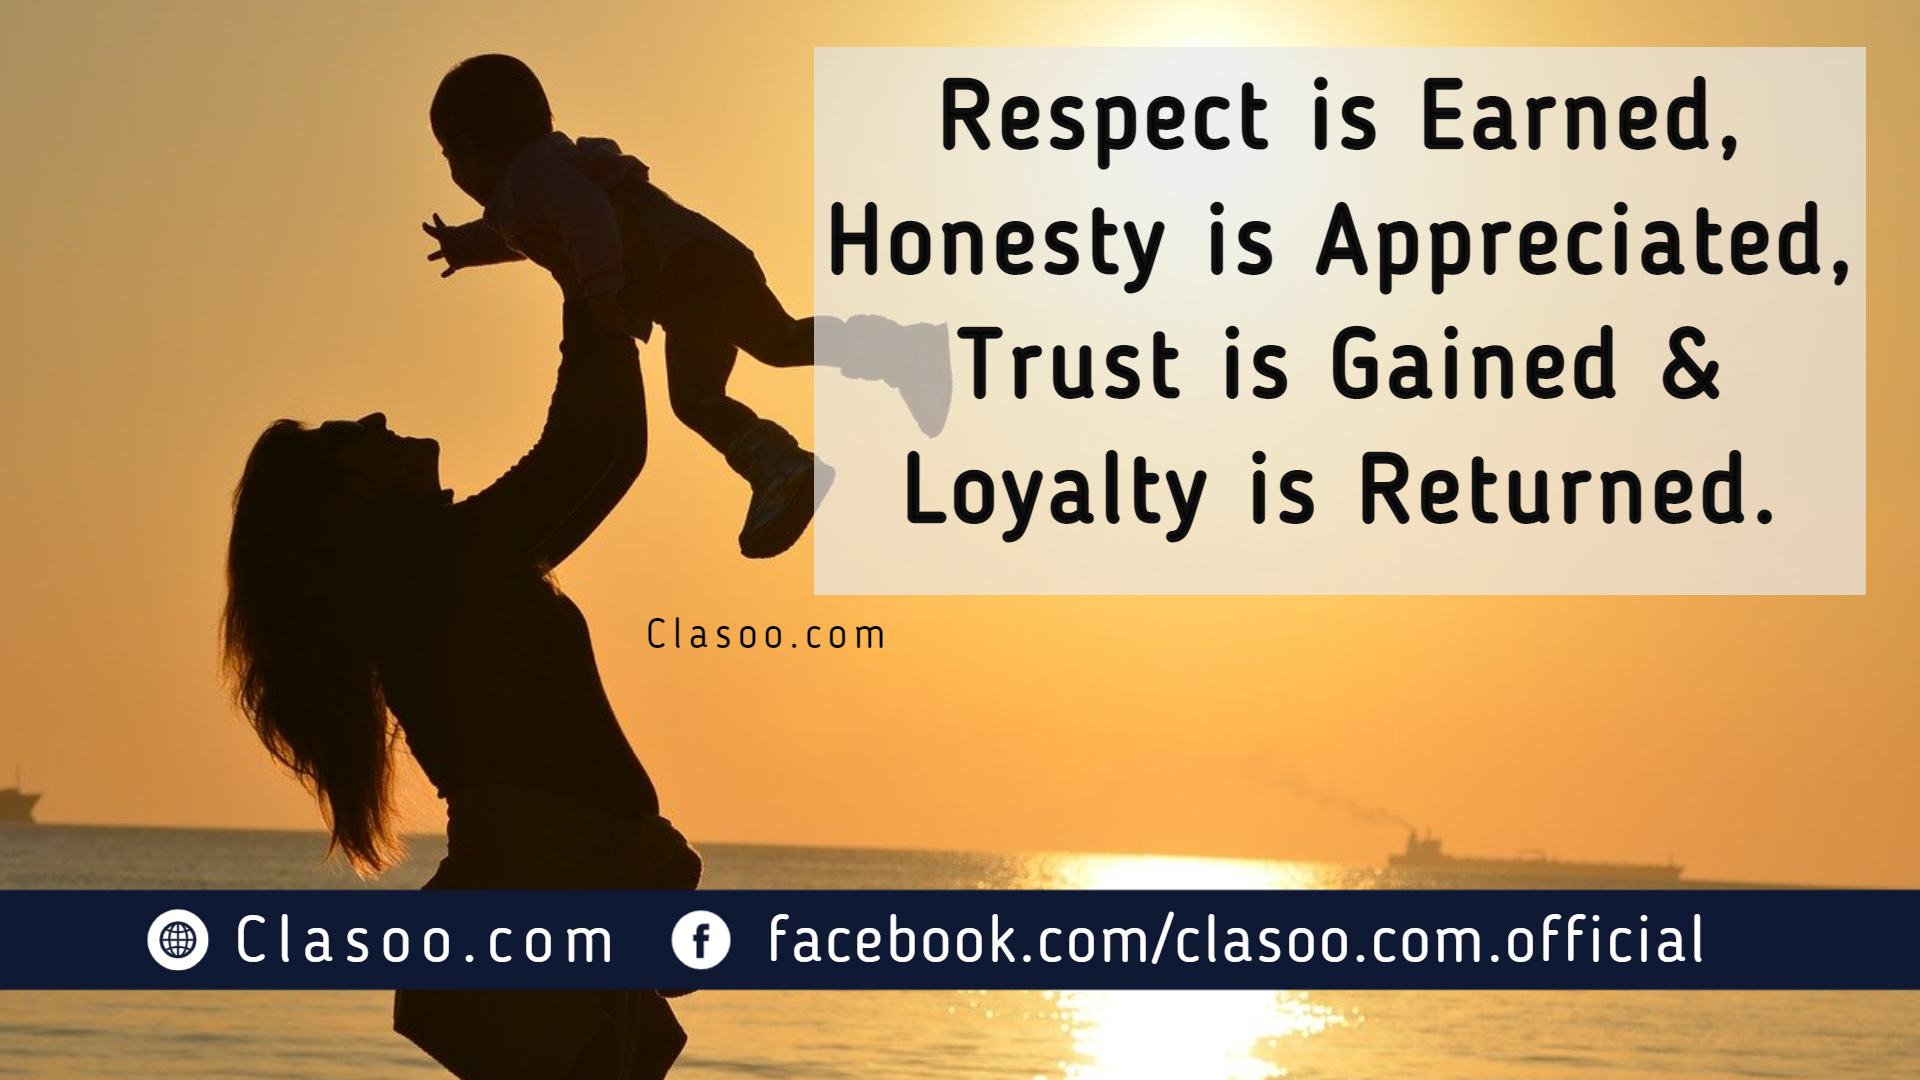 Respect is Earned, Honesty is Appreciated, Trust is Gained and Loyalty is Returned